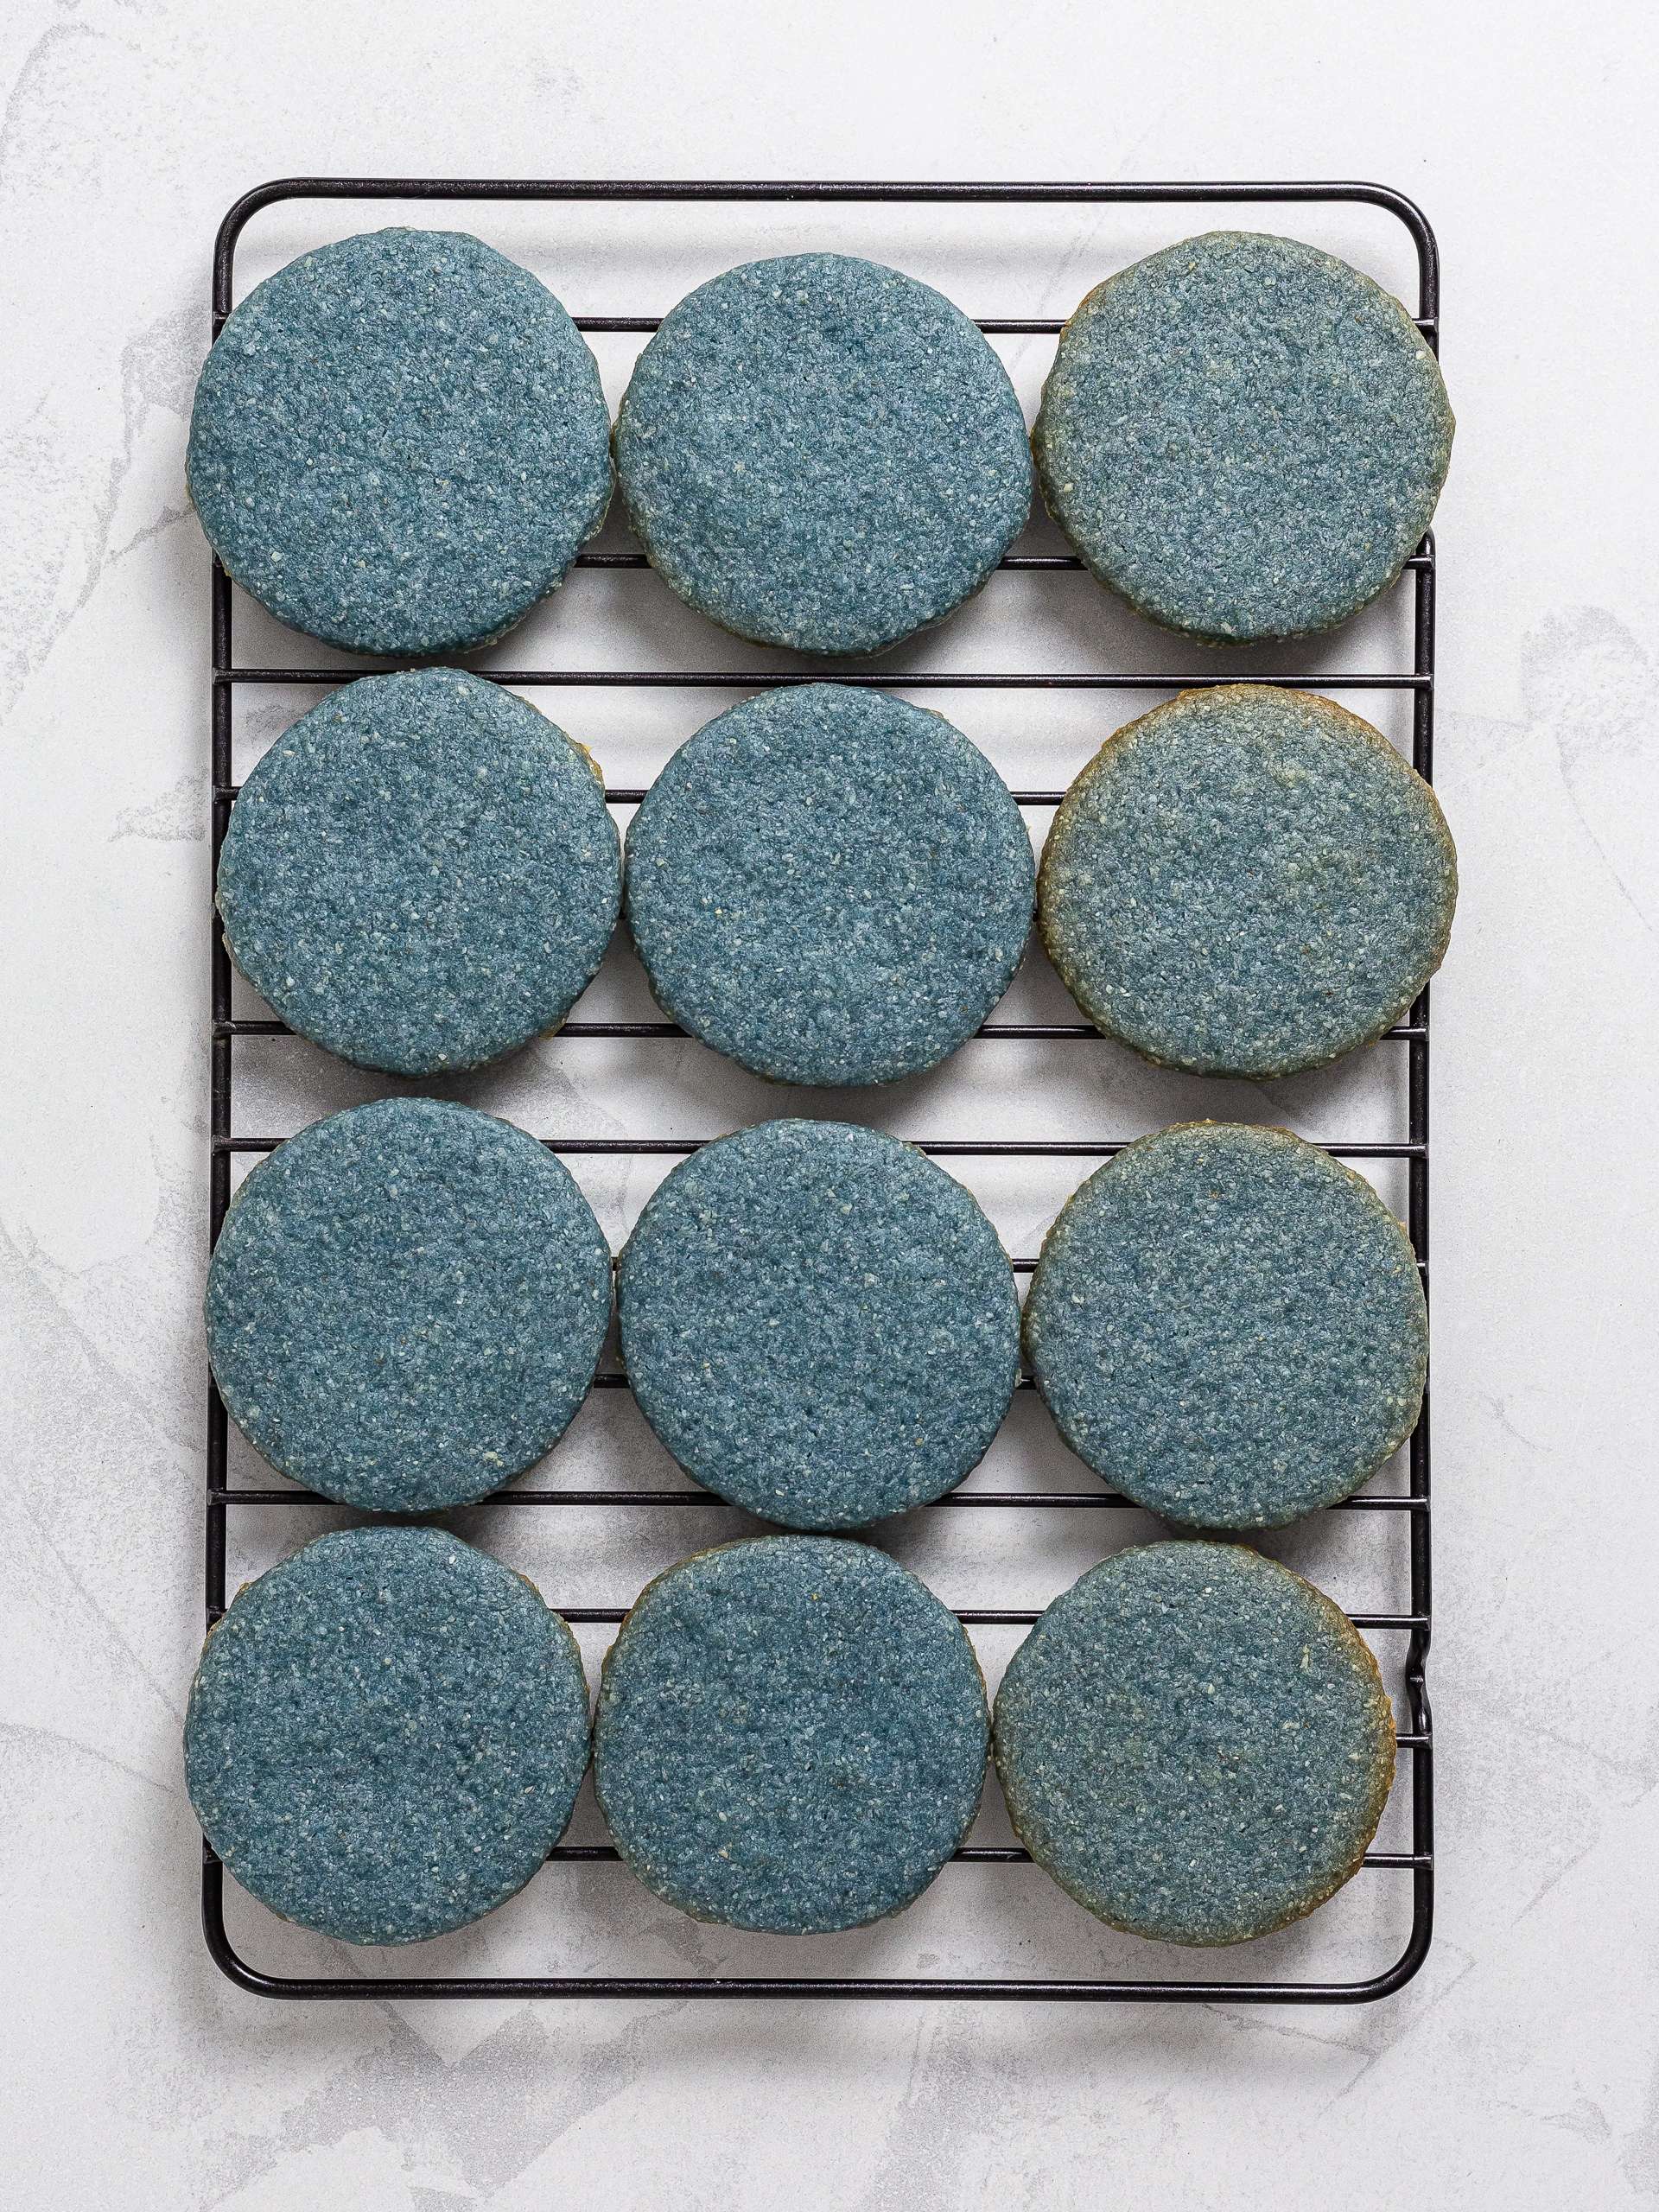 baked butterfly pea cookies